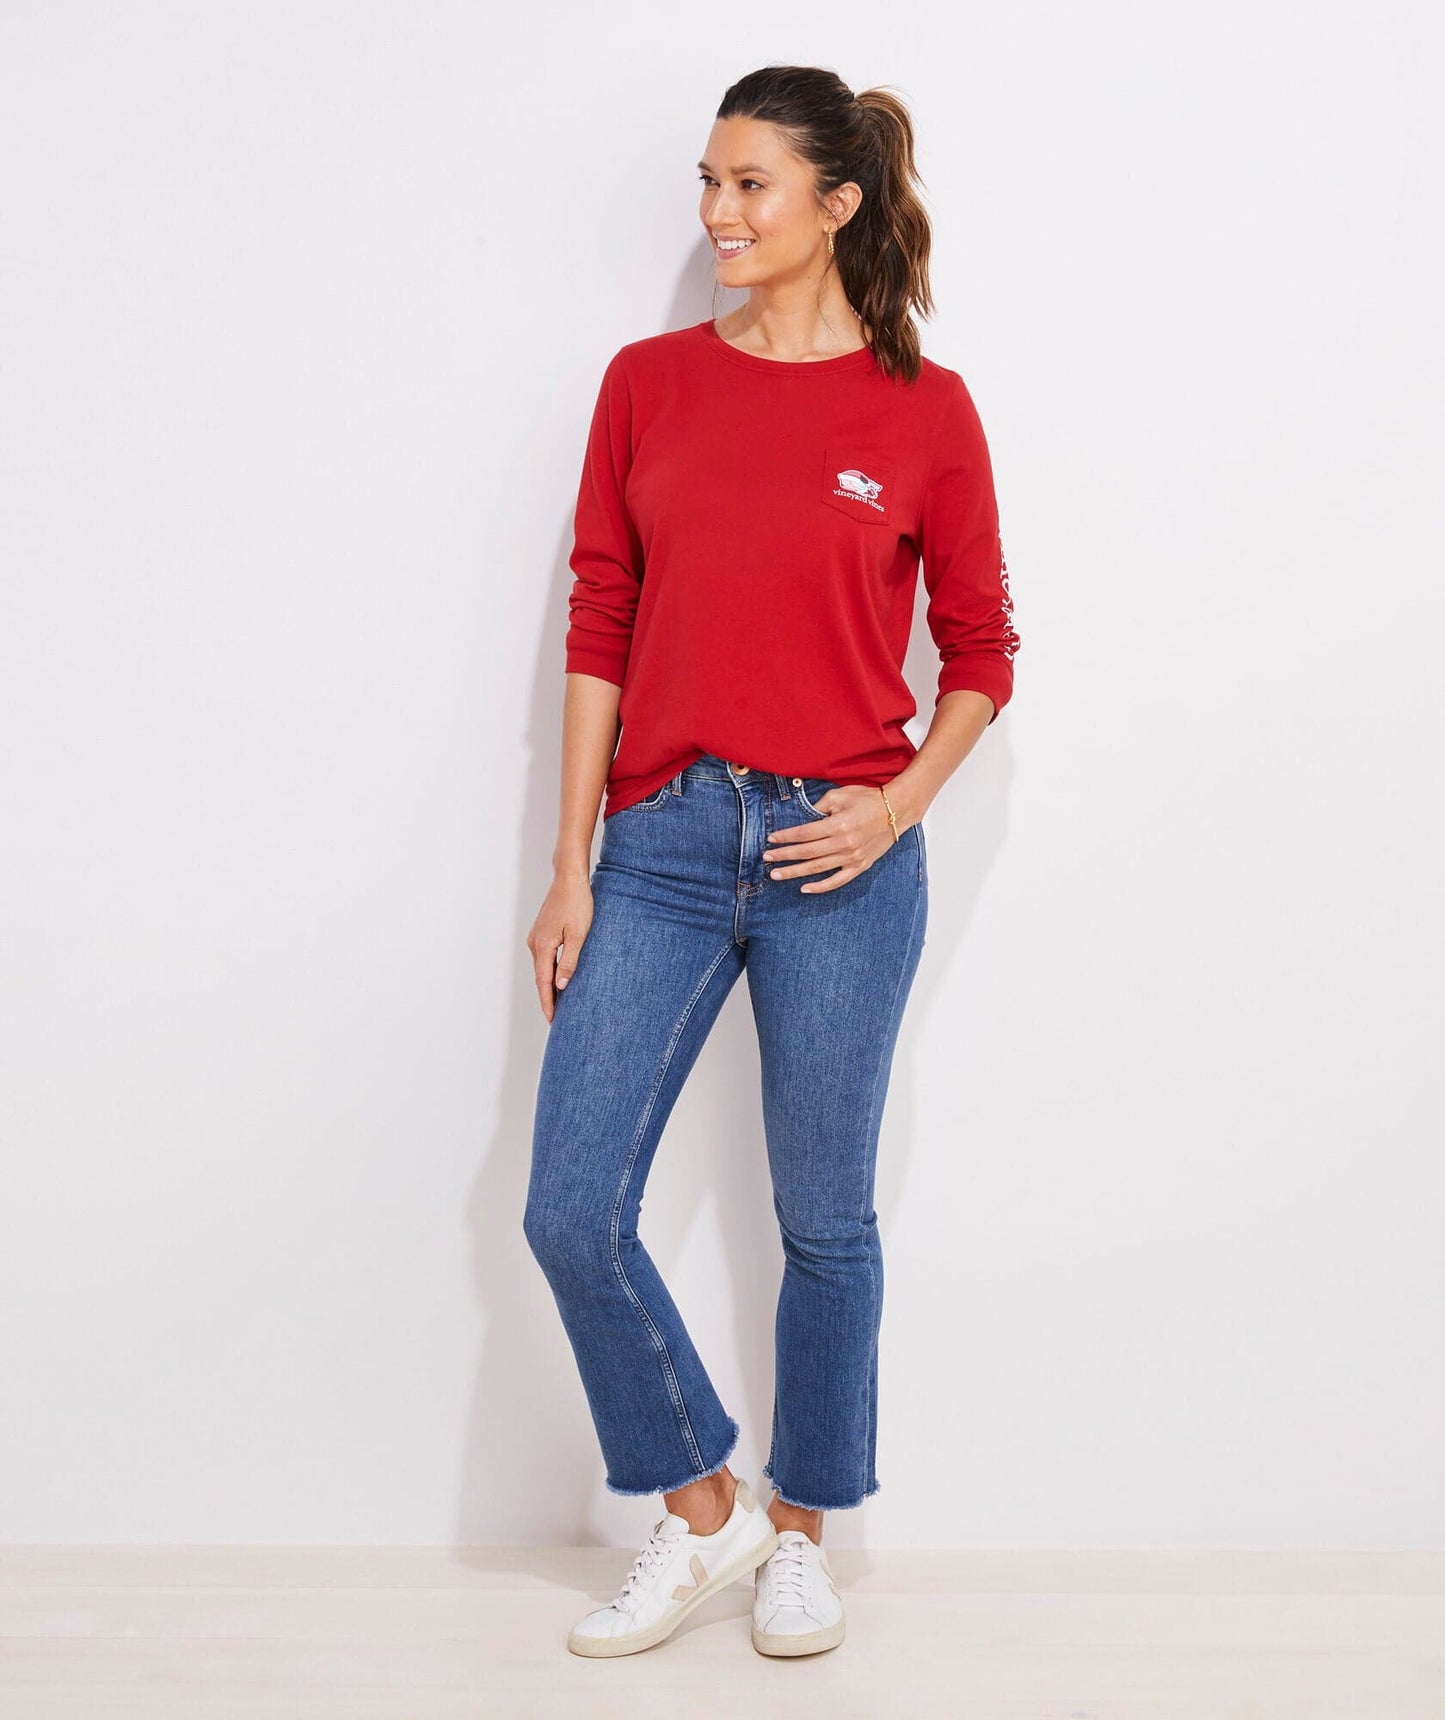 Mrs. Claus LS Tee- Savvy Red